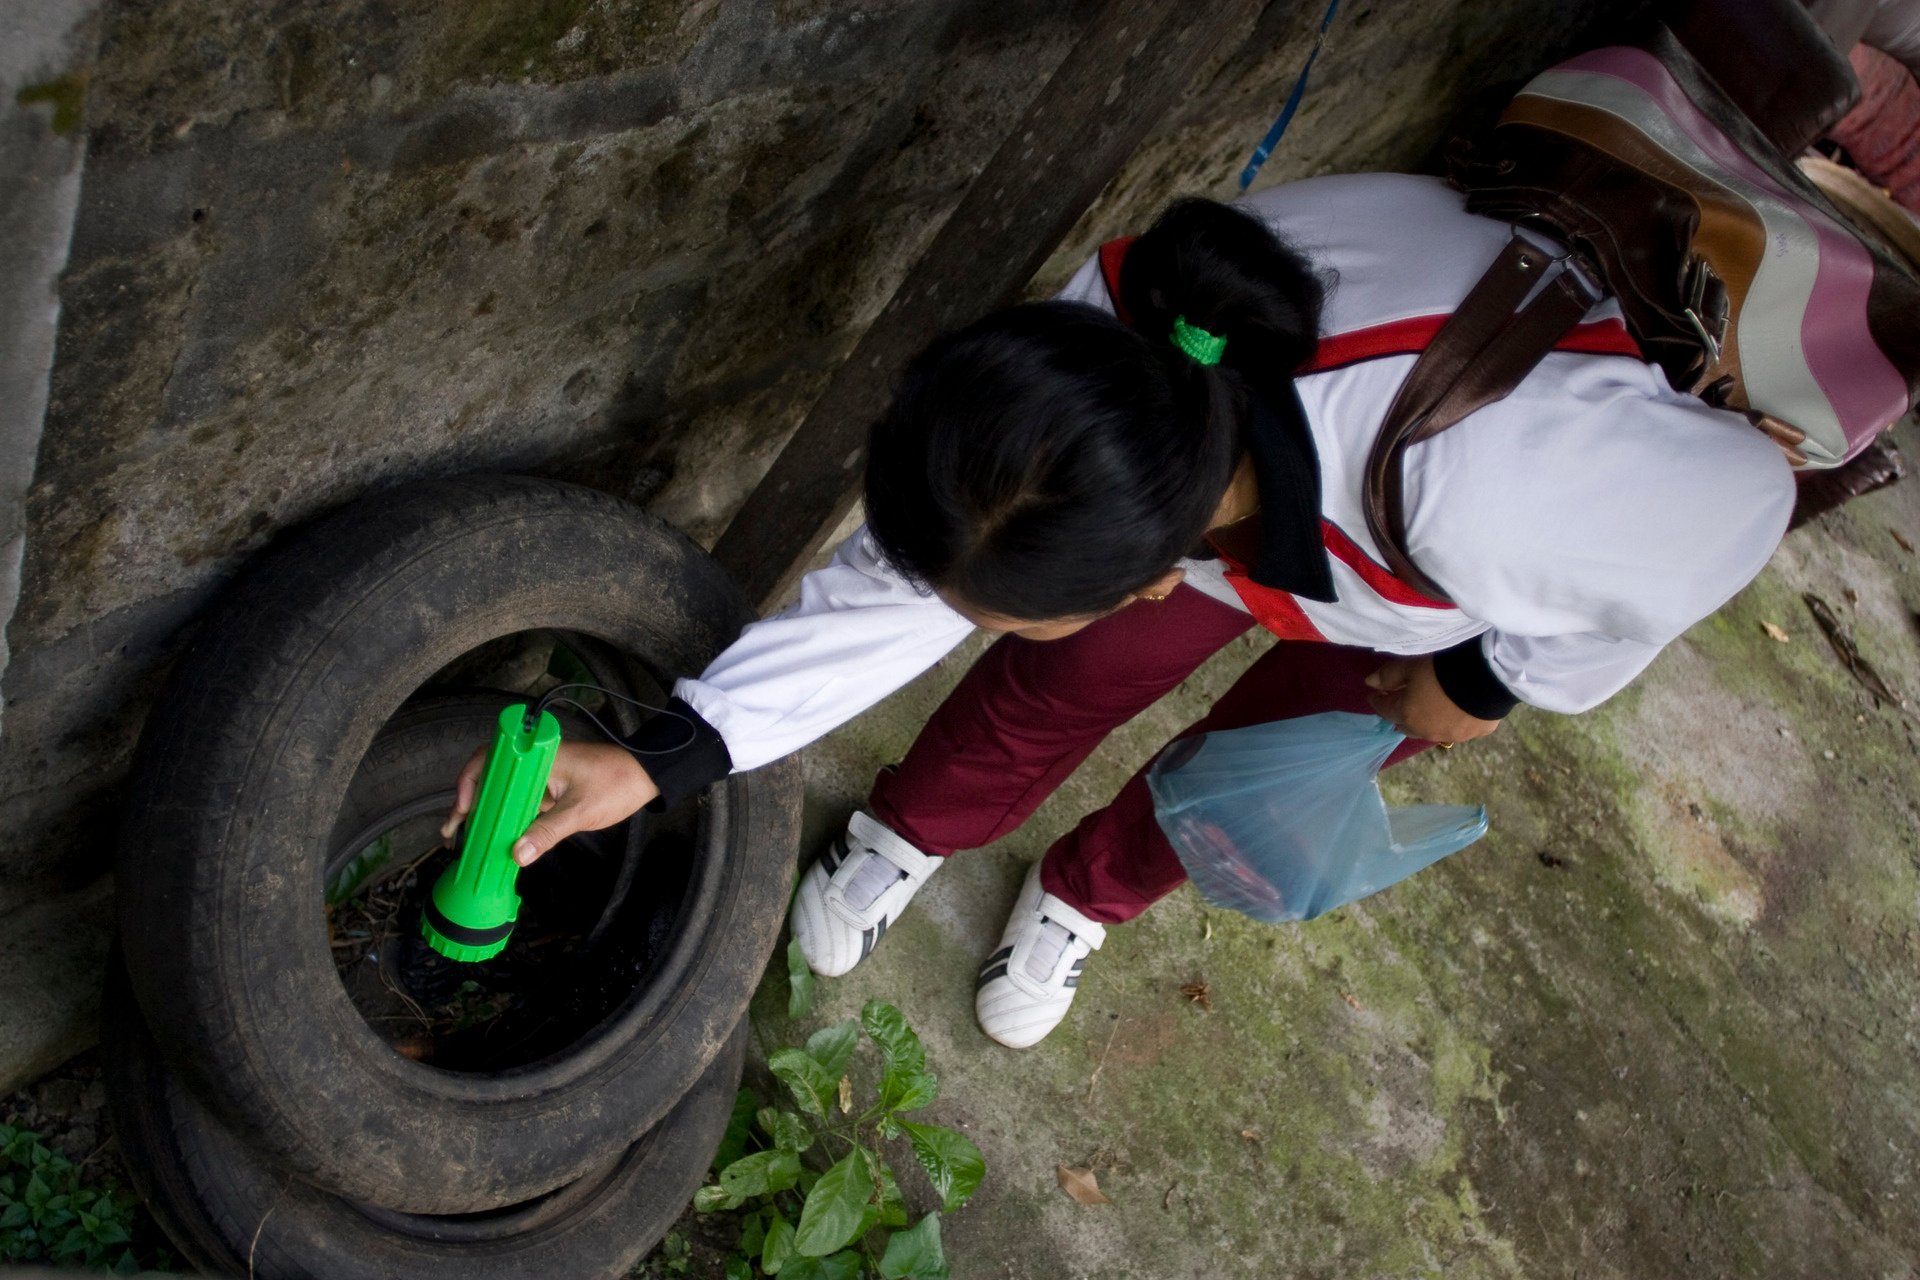 Woman shines a light in a tyre looking for mosquito breeding sites